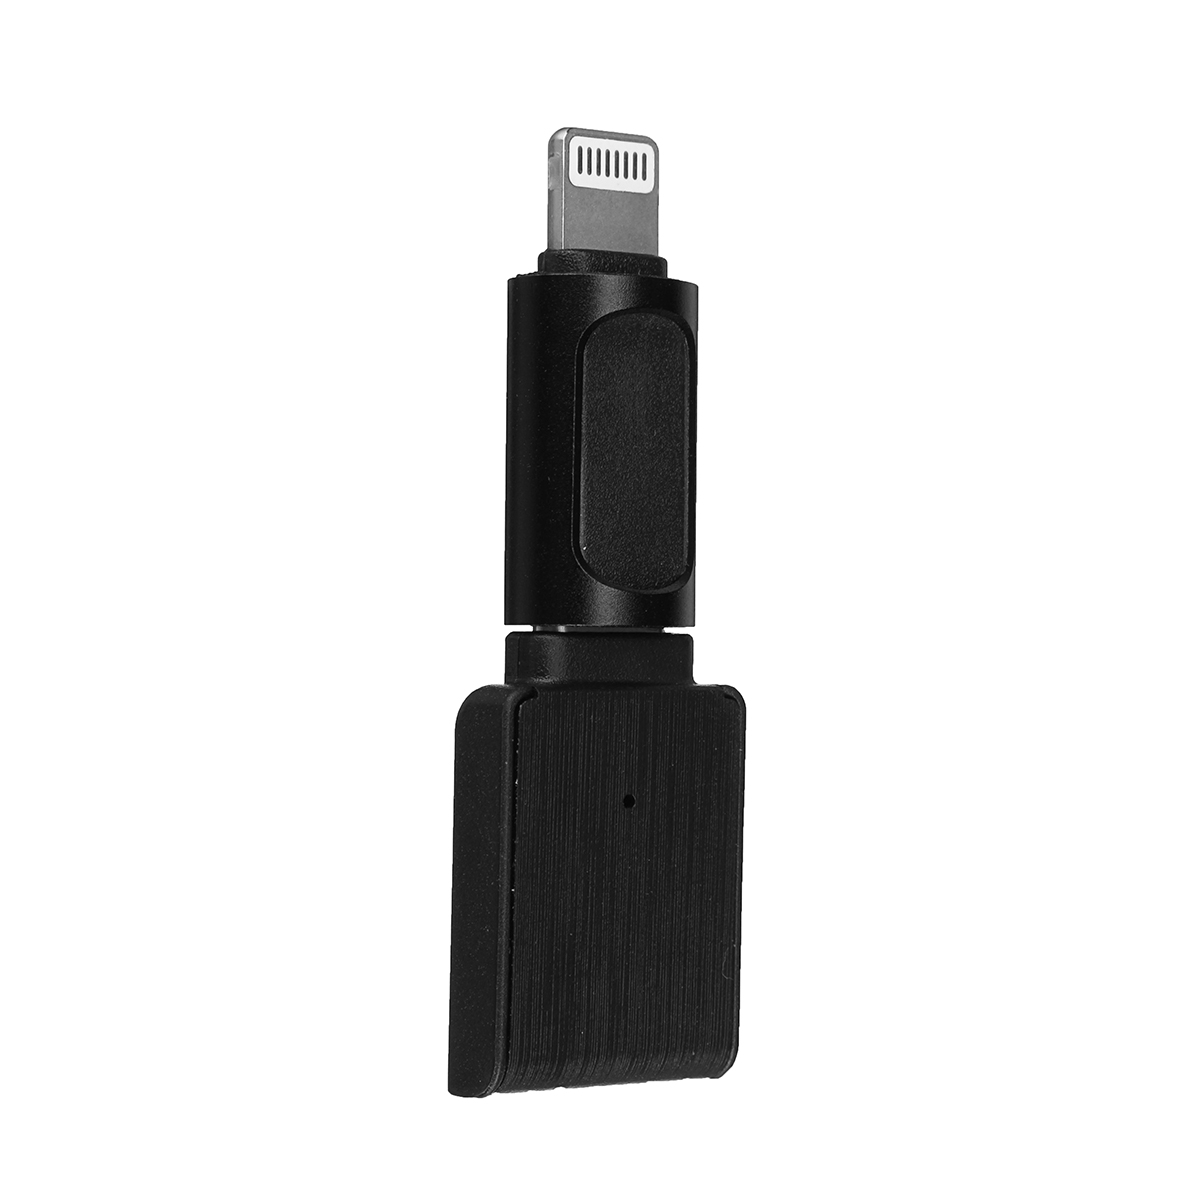 Find E300 Wireless Microphone Lavalier MIC Adapter Professional Recording Live Streaming Game for iPhone Android PC Computer for Sale on Gipsybee.com with cryptocurrencies